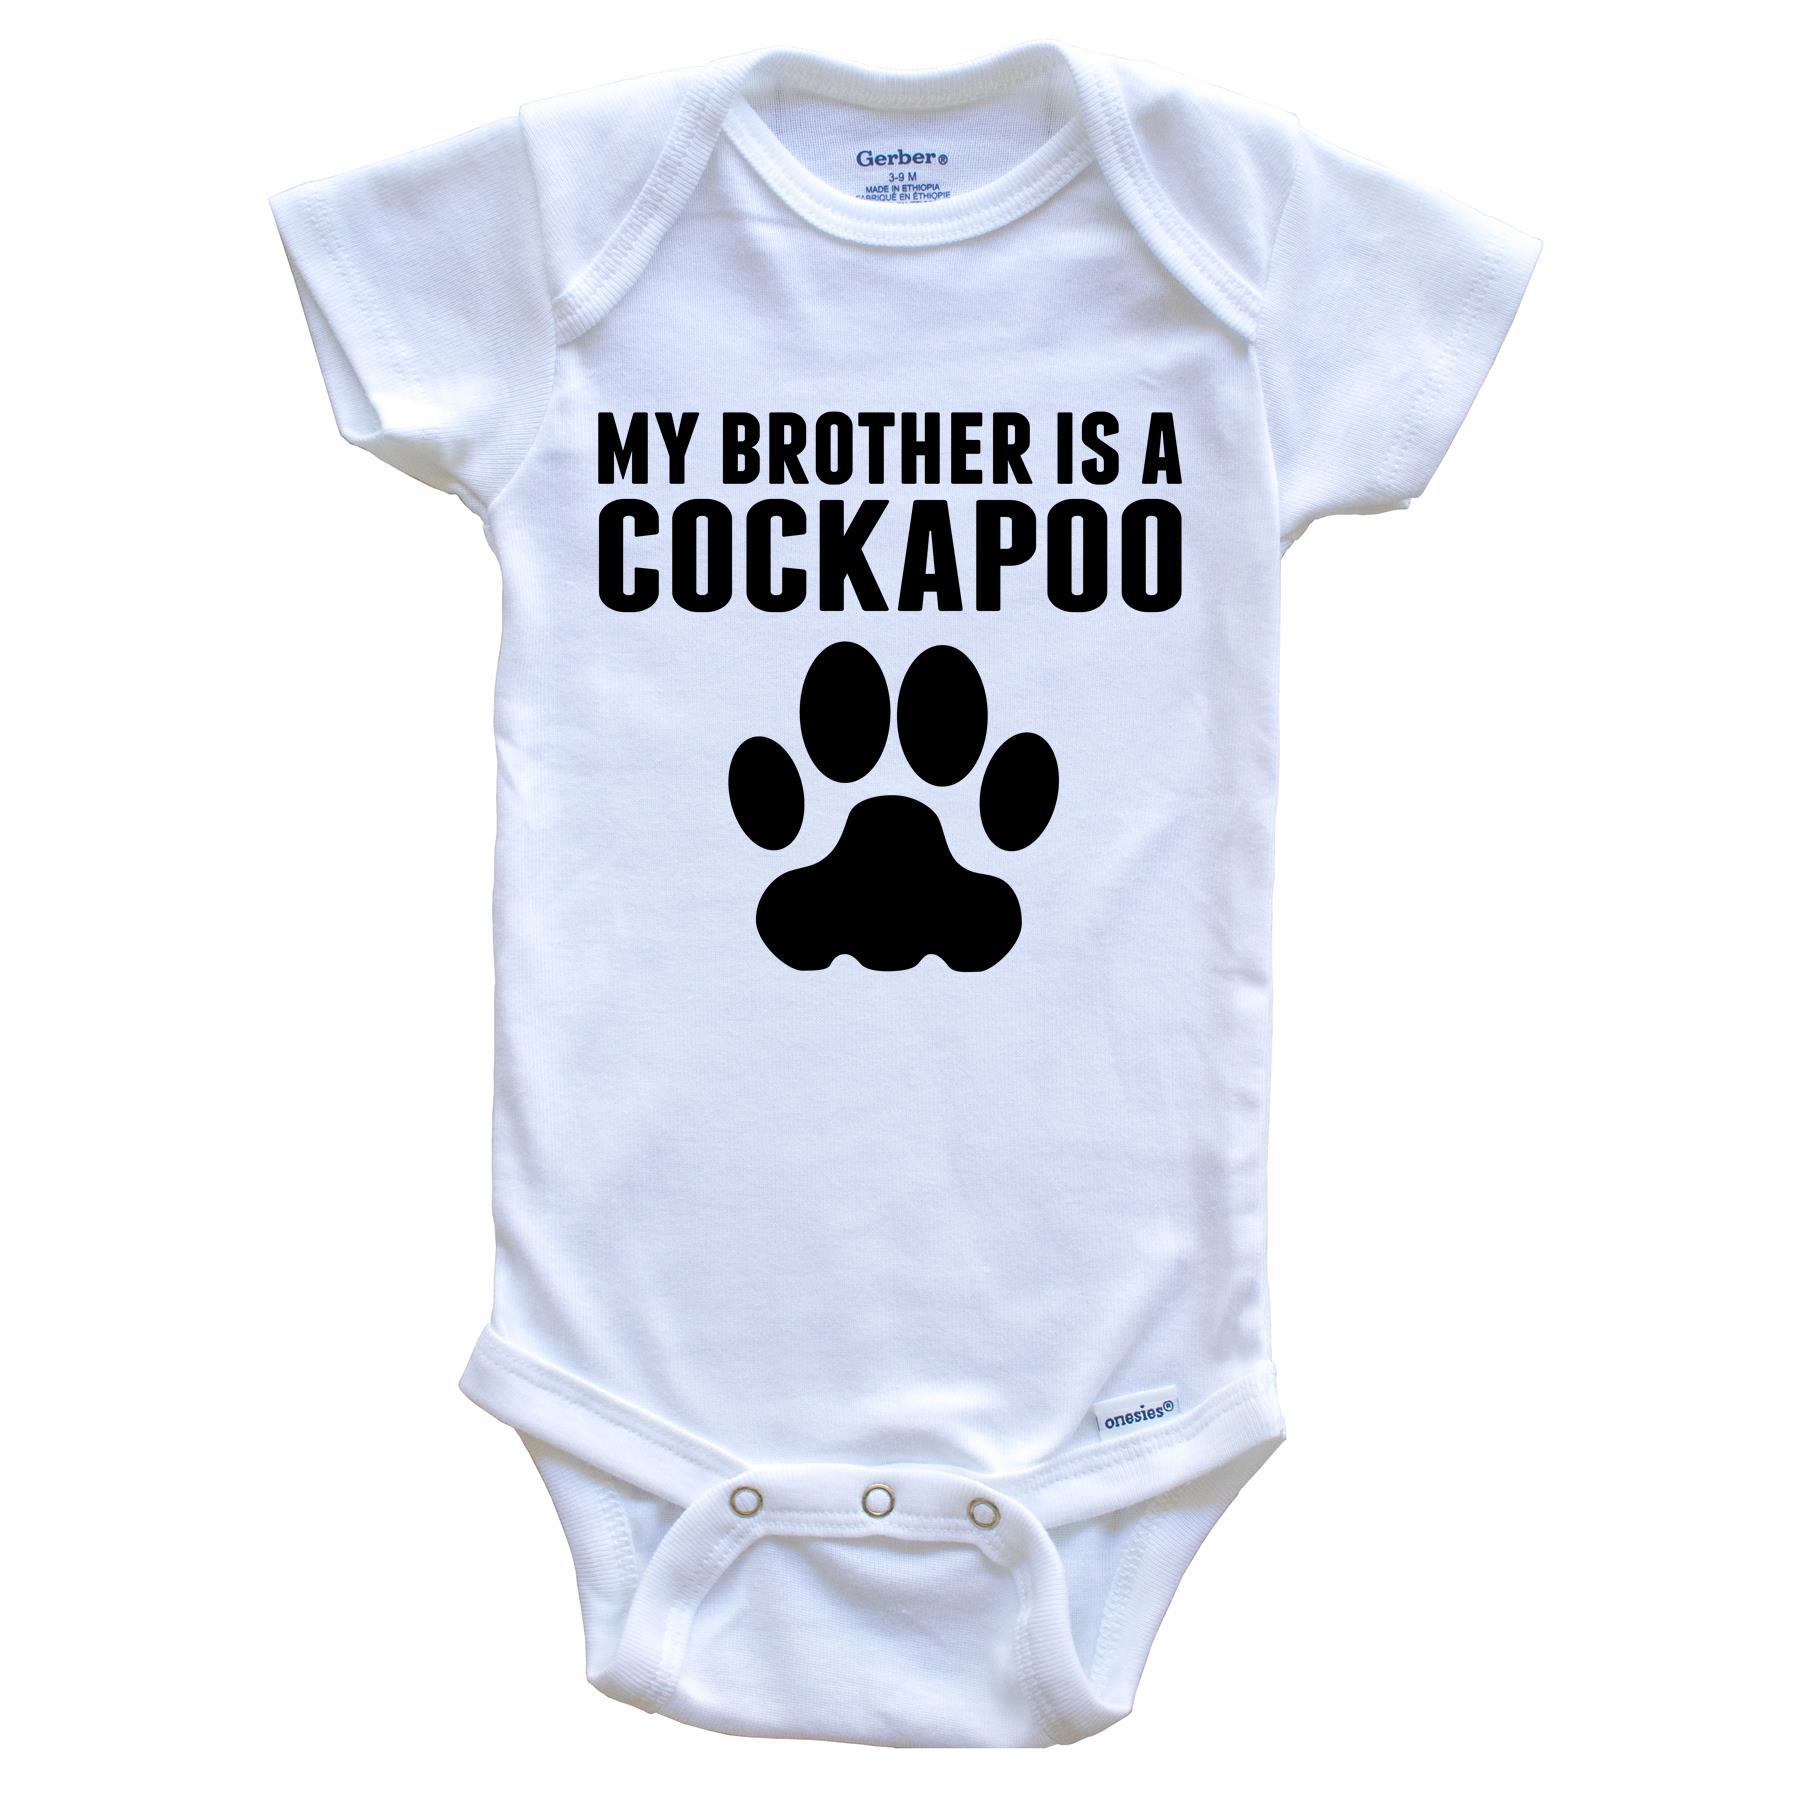 My Brother Is A Cockapoo Baby Onesie